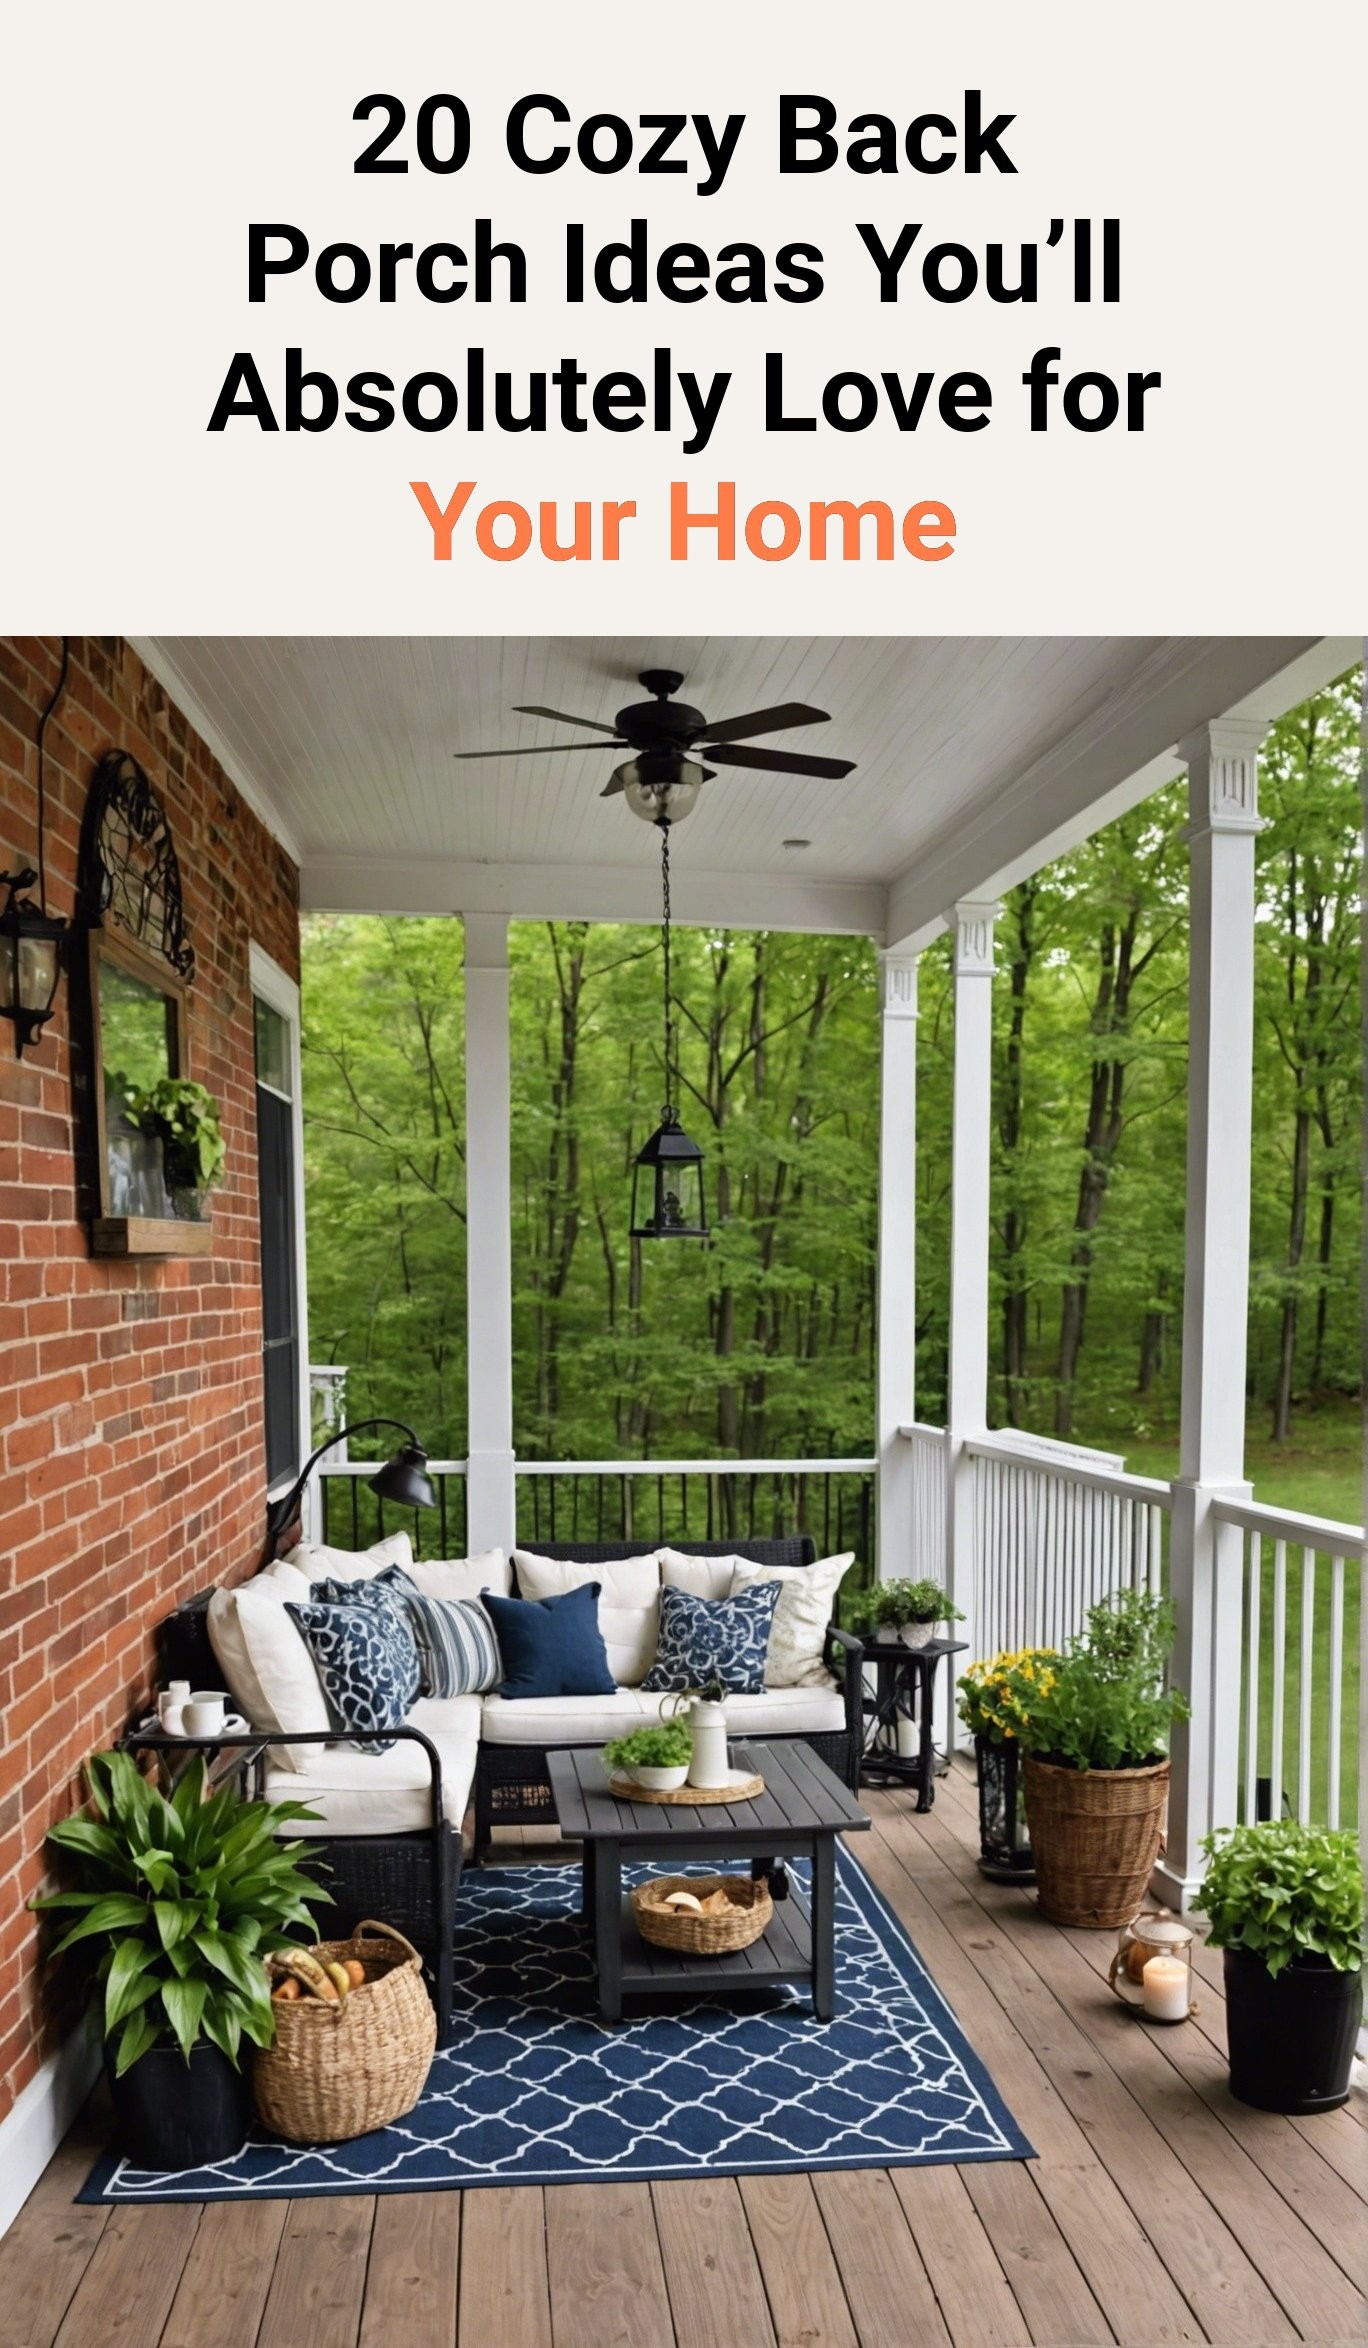 20 Cozy Back Porch Ideas You’ll Absolutely Love for Your Home